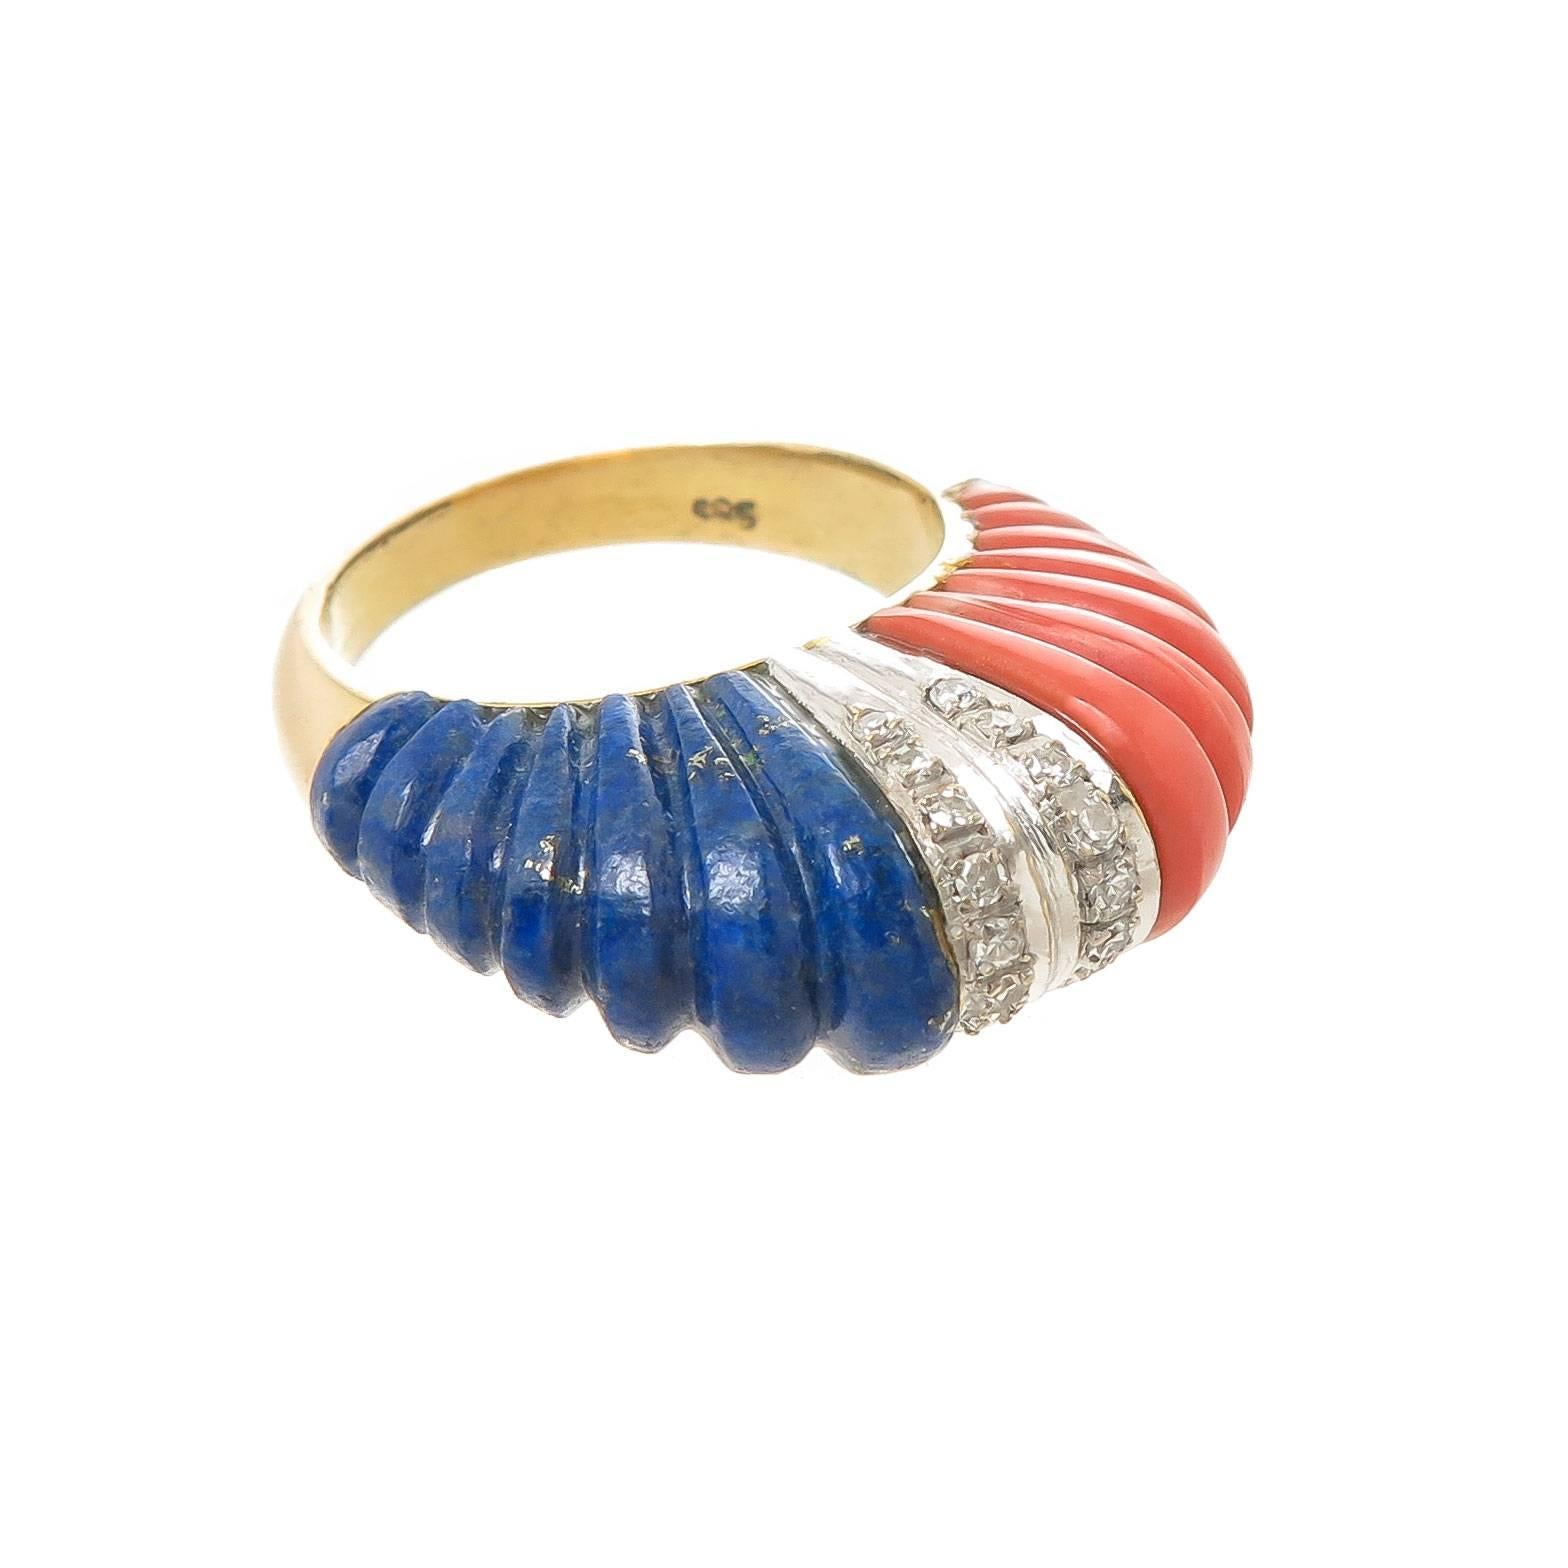 Circa 1960s 14K Yellow Gold Dome Ring, set with Diamonds and having Ribbed carved Coral and Lapis Lazuli. Measuring 1/4 inch wide and 1/2 inch high. Finger size = 7 1/4. 